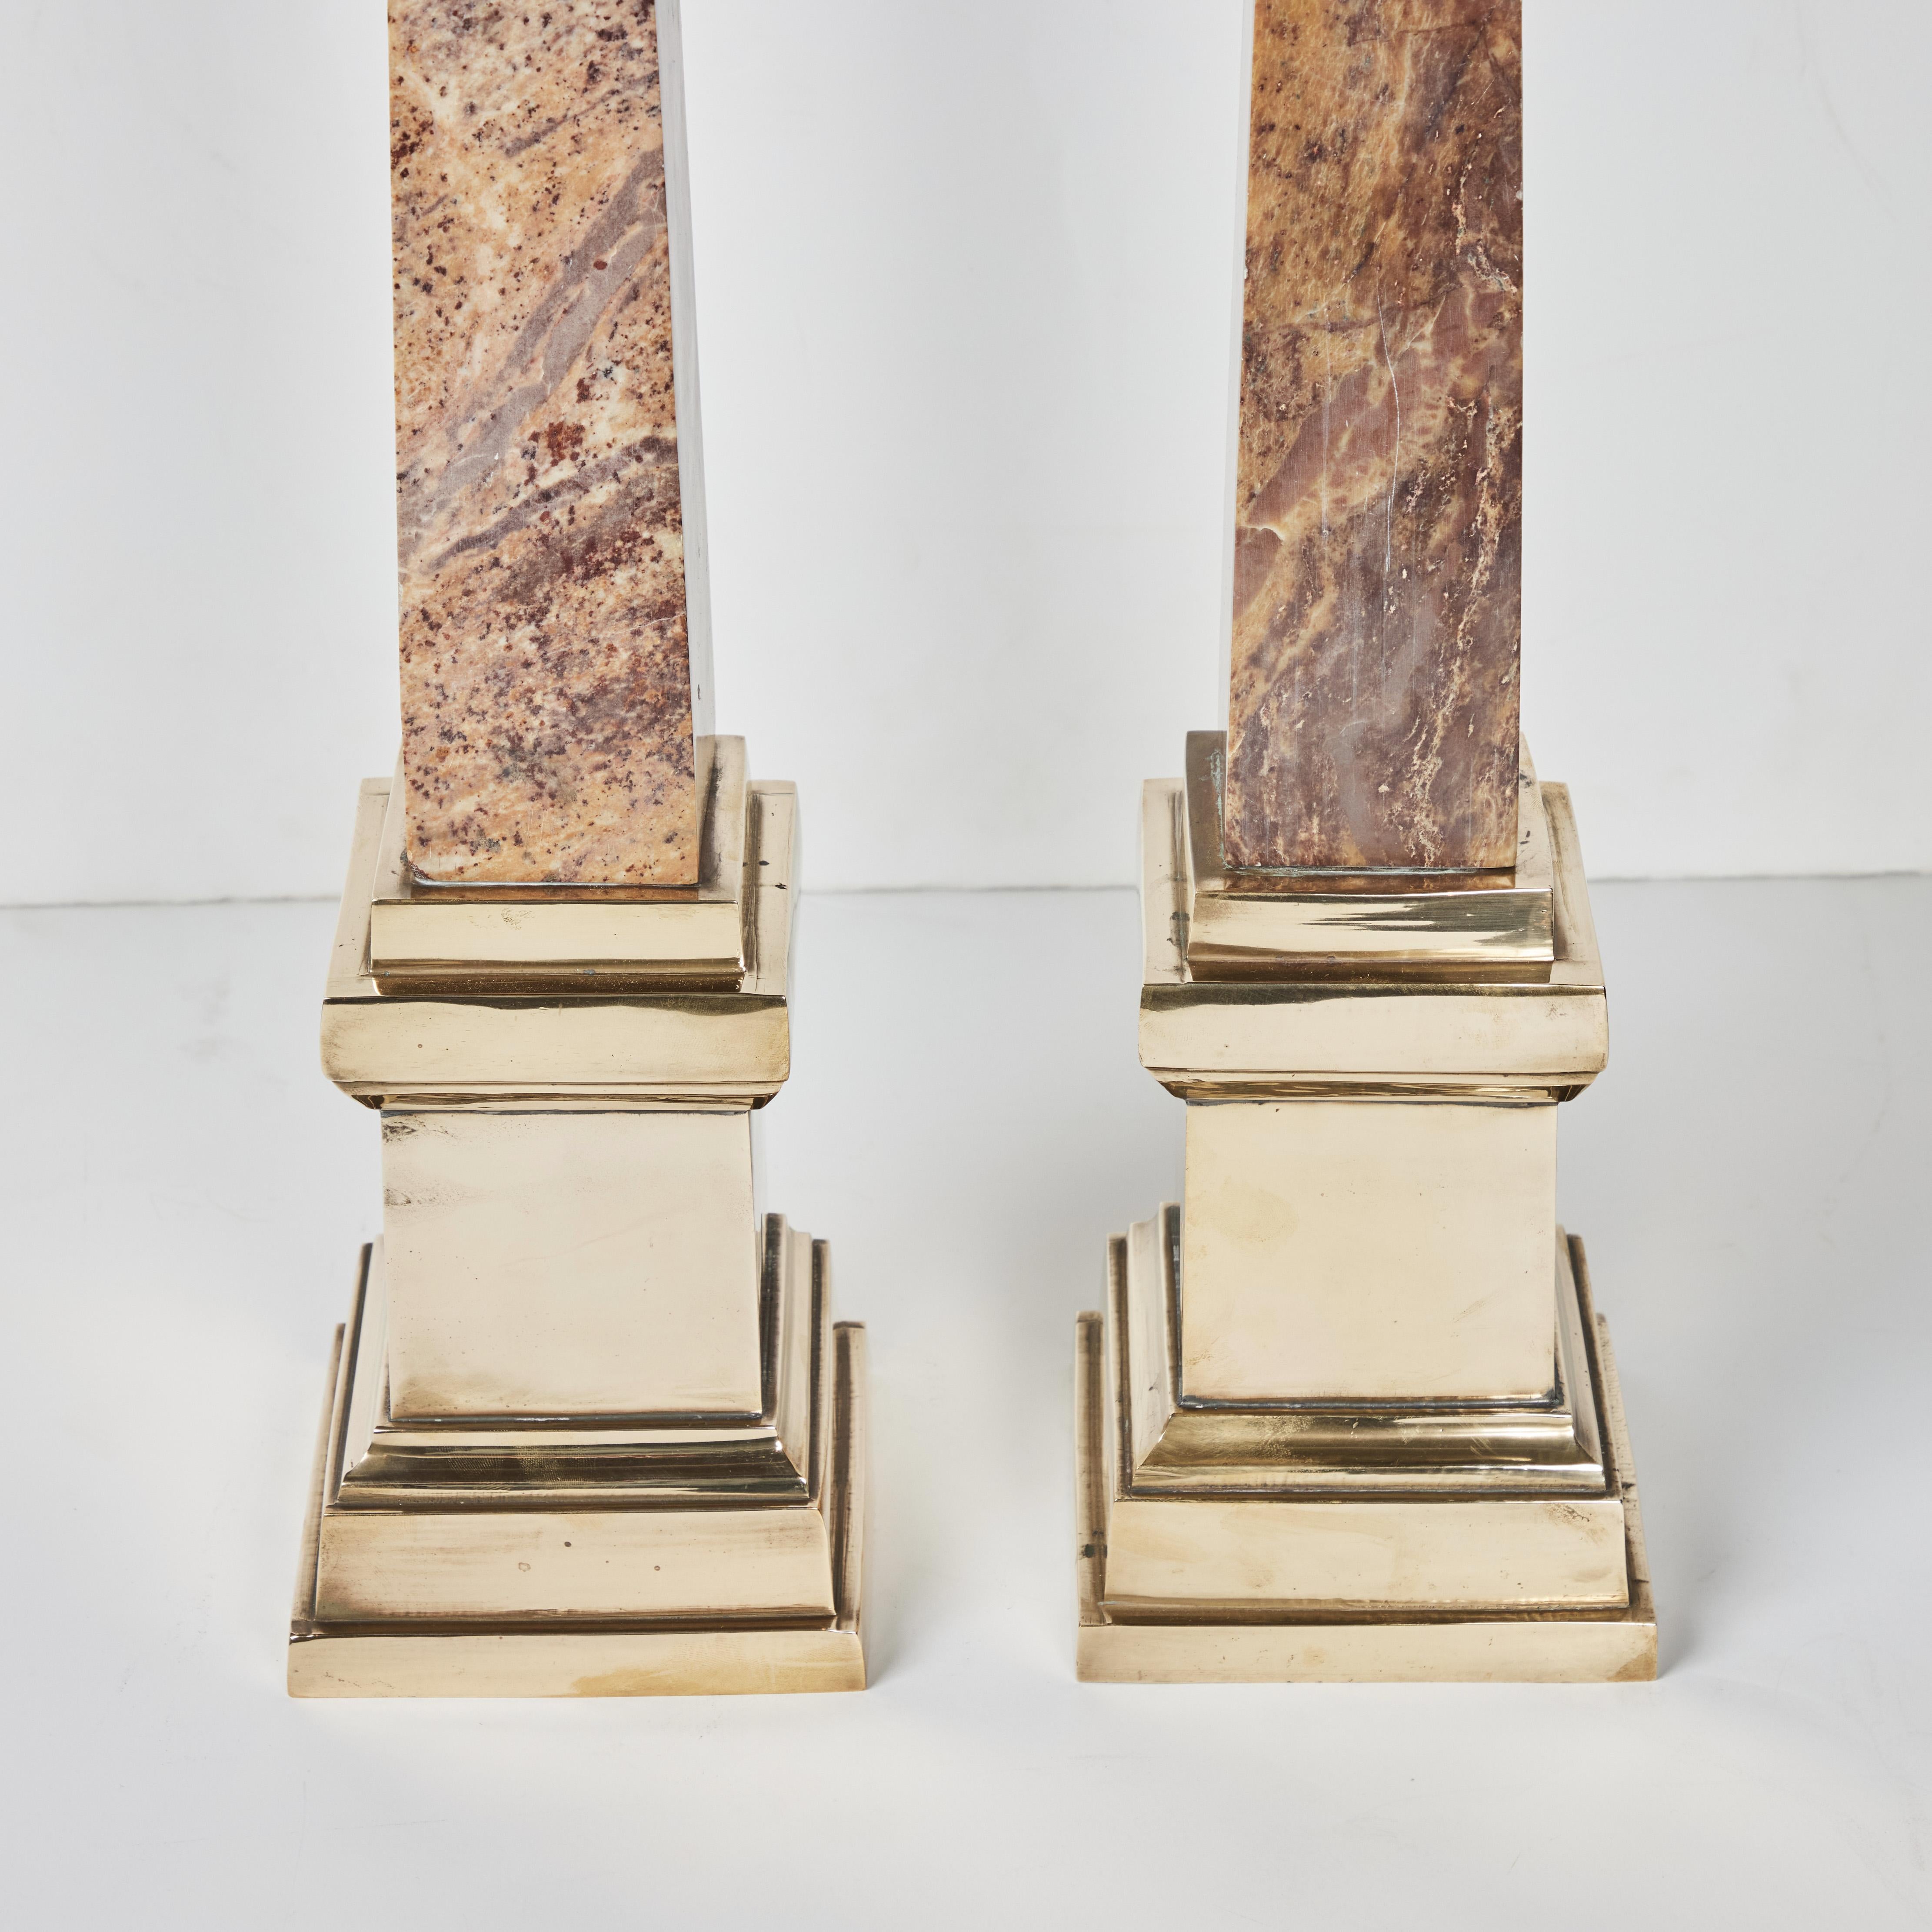 A pair of hand carved, beautifully veined, polished marble obelisks on polished brass bases.
